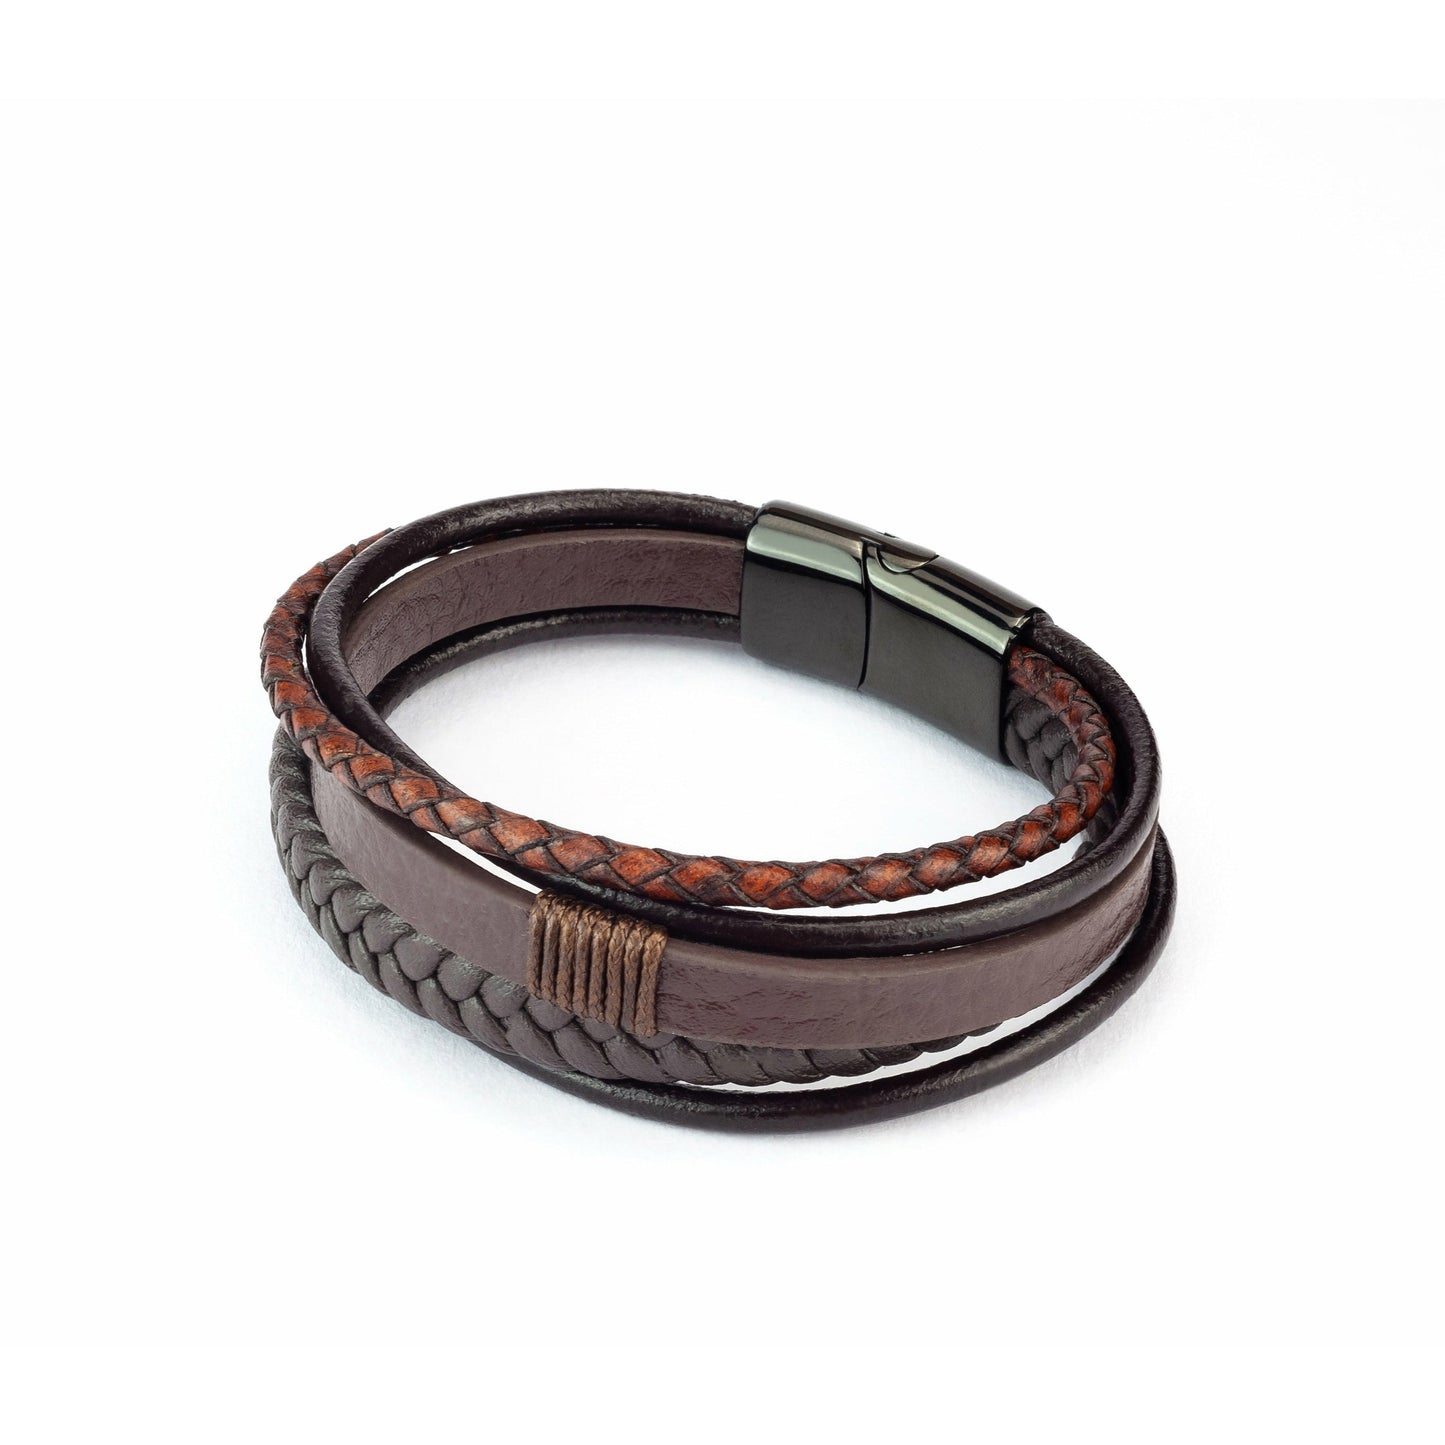 Crysttal Classic Leather Strap Bracelet in brown colour